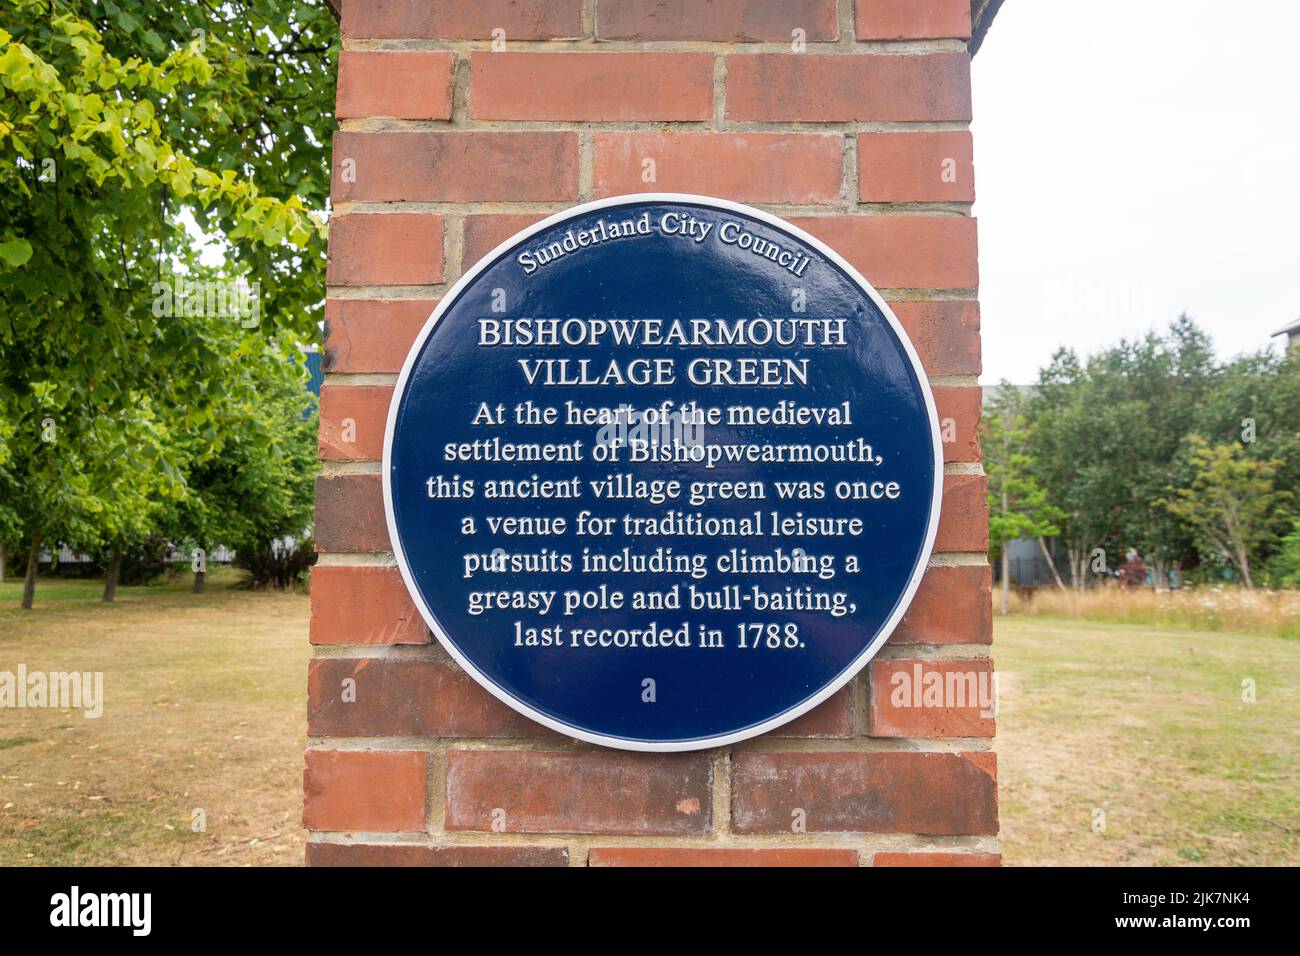 Bishopwearmouth Village Green Plaque, Town Park, City of Sunderland, Tyne and Wear, England, United Kingdom Stock Photo